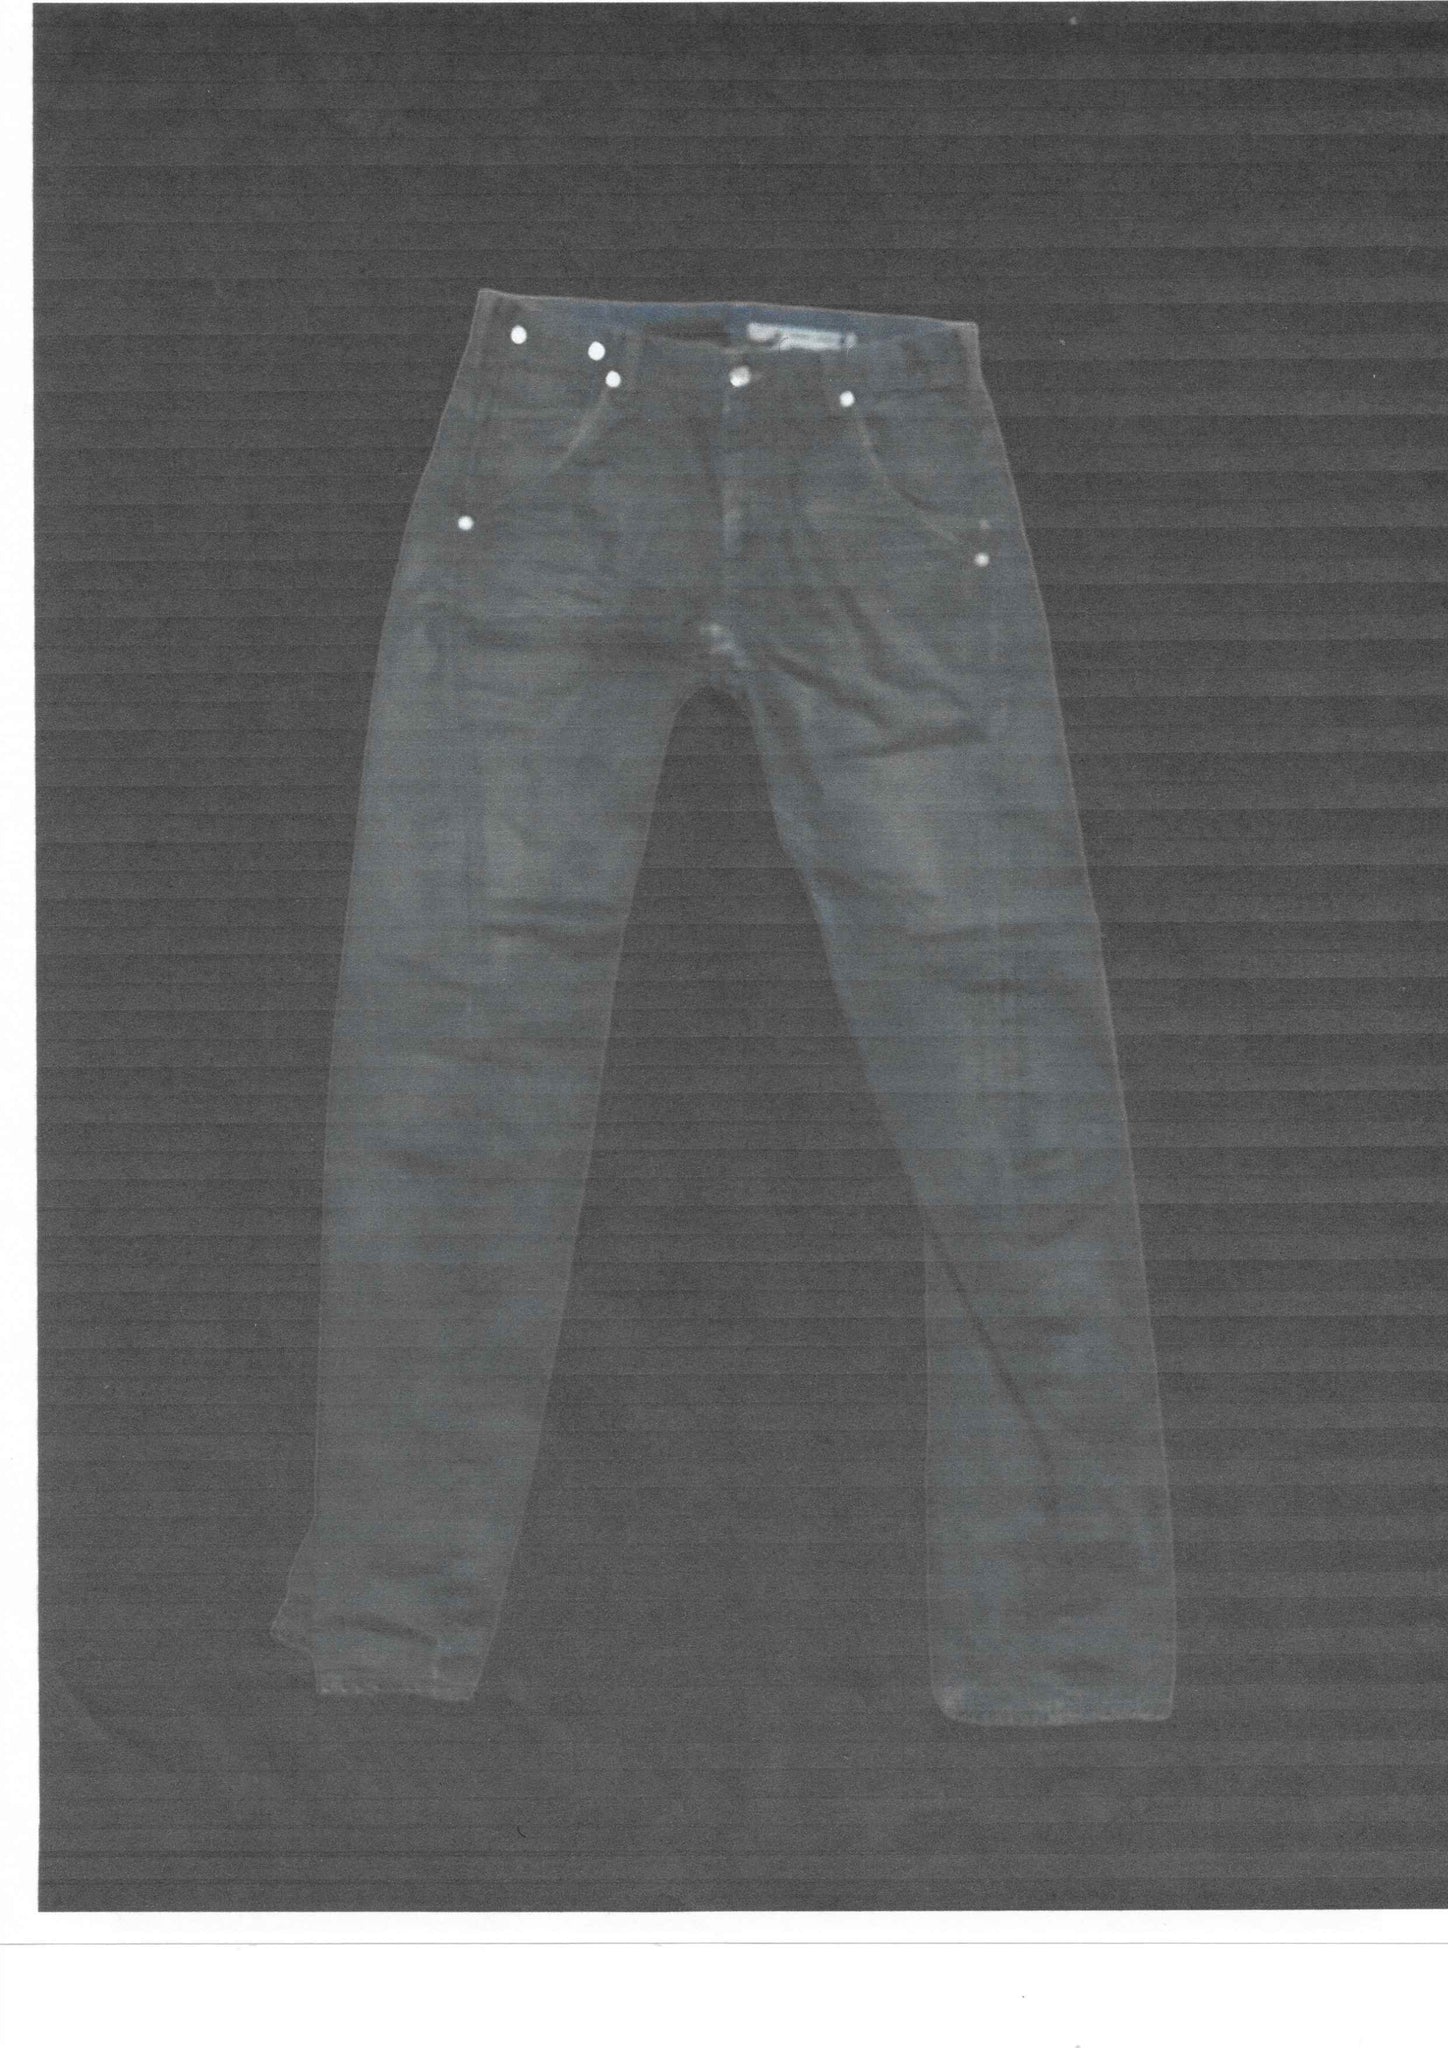 DIOR HEDI SLIMANE BLACK WAXED JEANS, Men's Fashion, Bottoms, Jeans on  Carousell